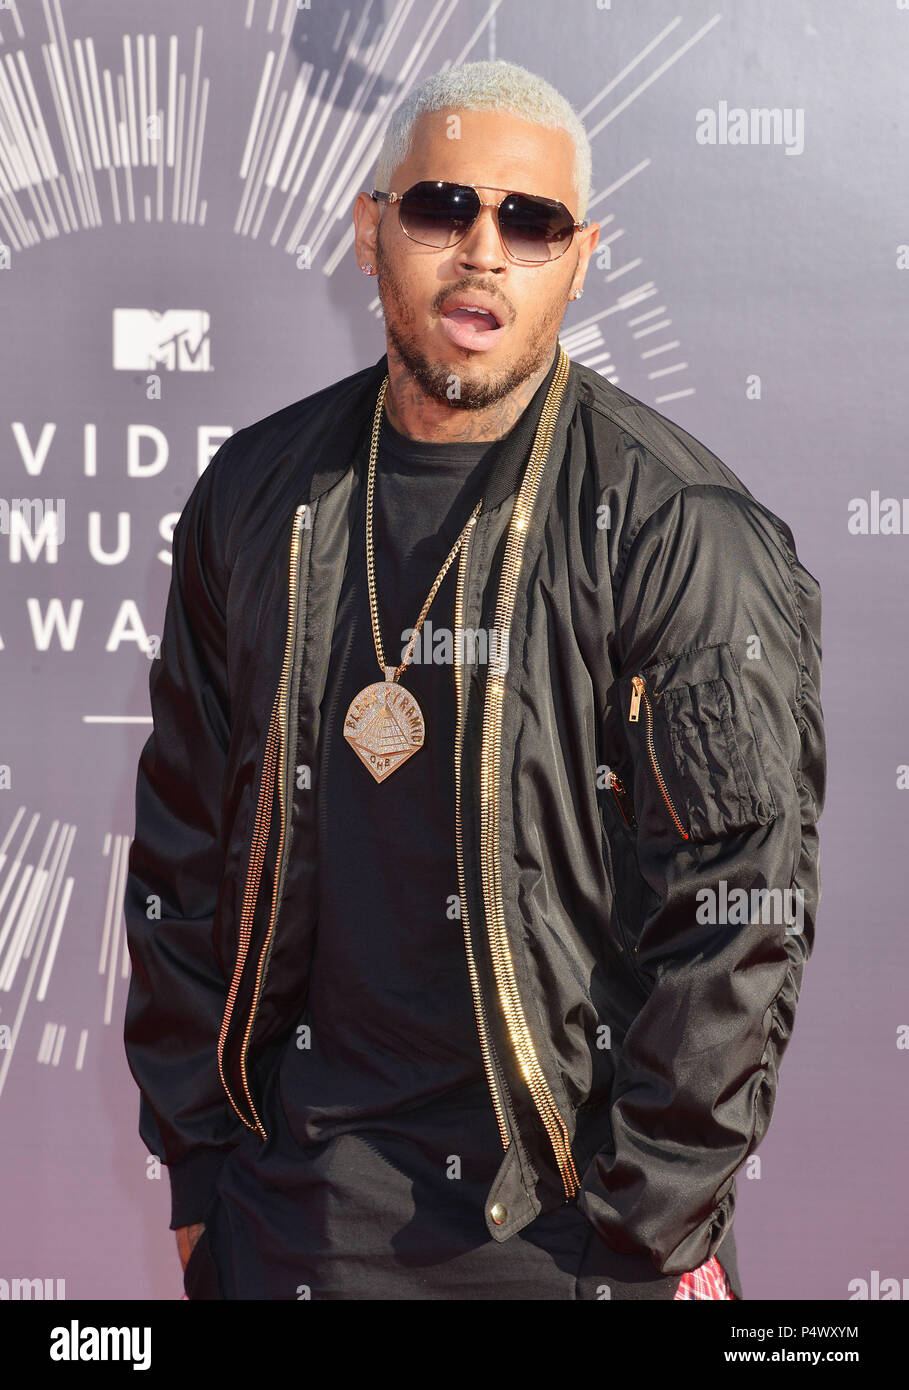 Chris Brown 149 at the  MTV Video Music Awards at the Great Western Forum in Los Angeles.Chris Brown 149 ------------- Red Carpet Event, Vertical, USA, Film Industry, Celebrities,  Photography, Bestof, Arts Culture and Entertainment, Topix Celebrities fashion /  Vertical, Best of, Event in Hollywood Life - California,  Red Carpet and backstage, USA, Film Industry, Celebrities,  movie celebrities, TV celebrities, Music celebrities, Photography, Bestof, Arts Culture and Entertainment,  Topix, Three Quarters, vertical, one person,, from the year , 2014, inquiry tsuni@Gamma-USA.com Stock Photo